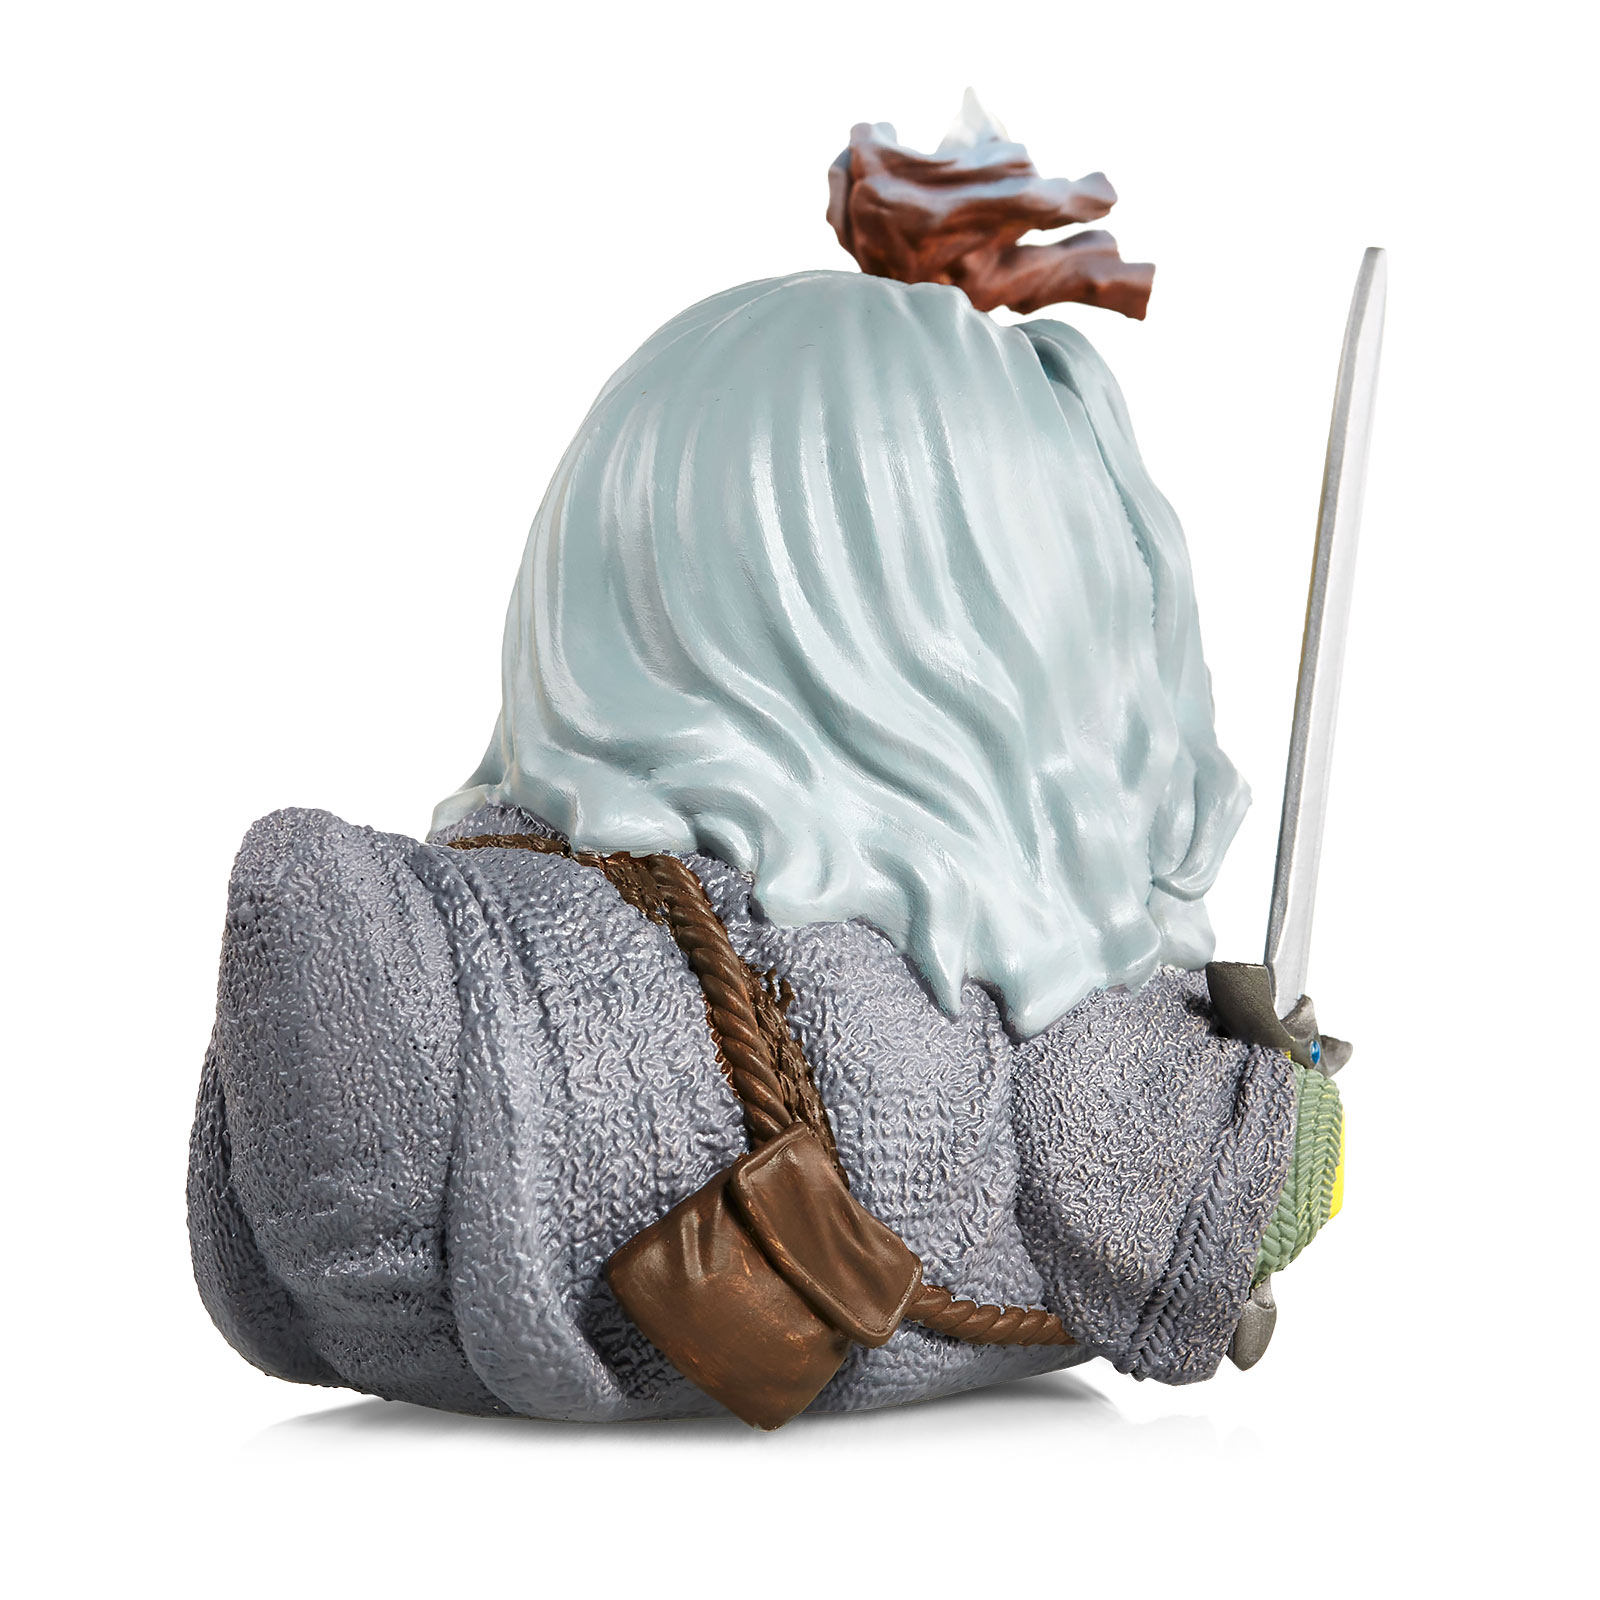 Lord of the Rings - Gandalf TUBBZ Decorative Duck